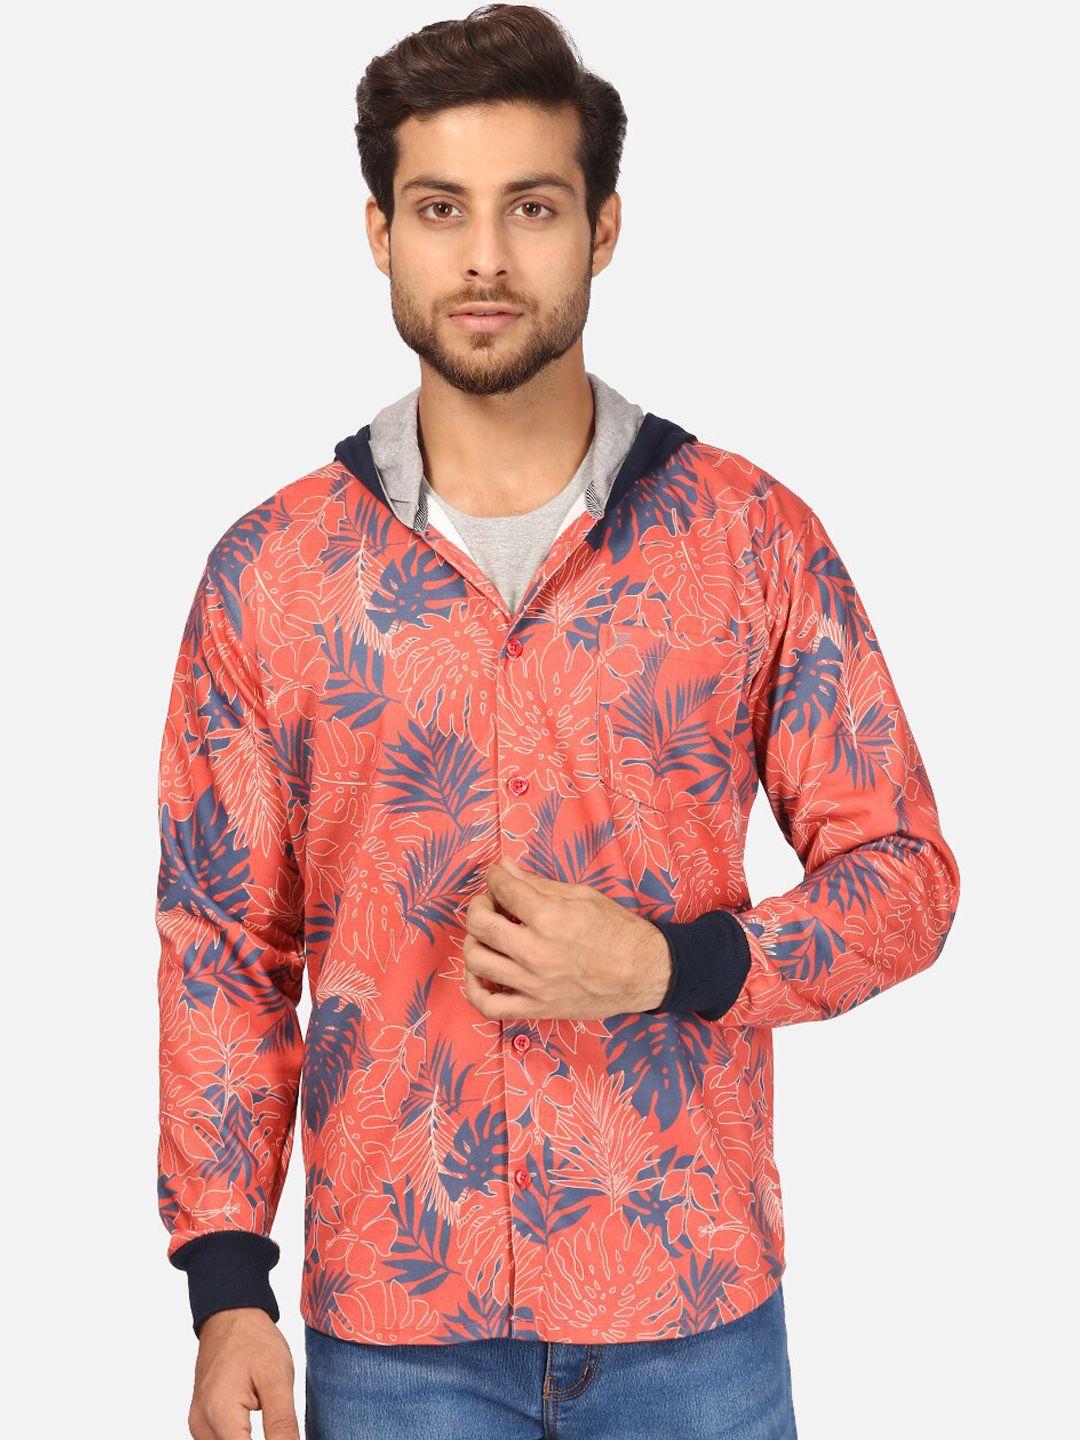 bullmer men coral red & navy blue floral opaque printed fleece hooded casual shirt